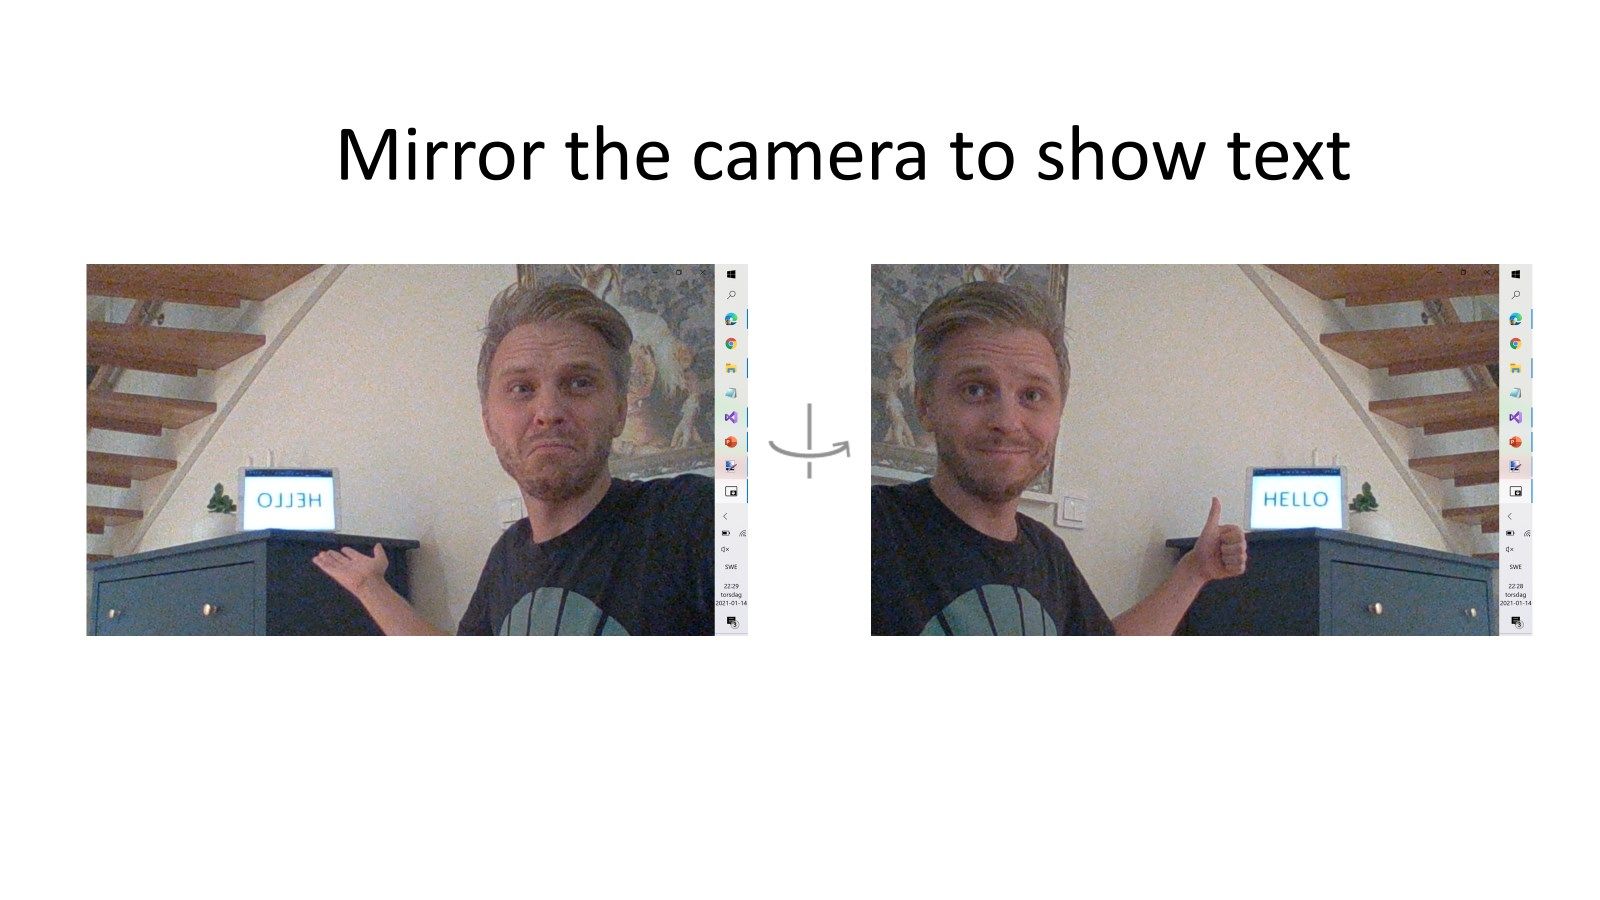 Show the camera in full screen and mirror it to make text readable.